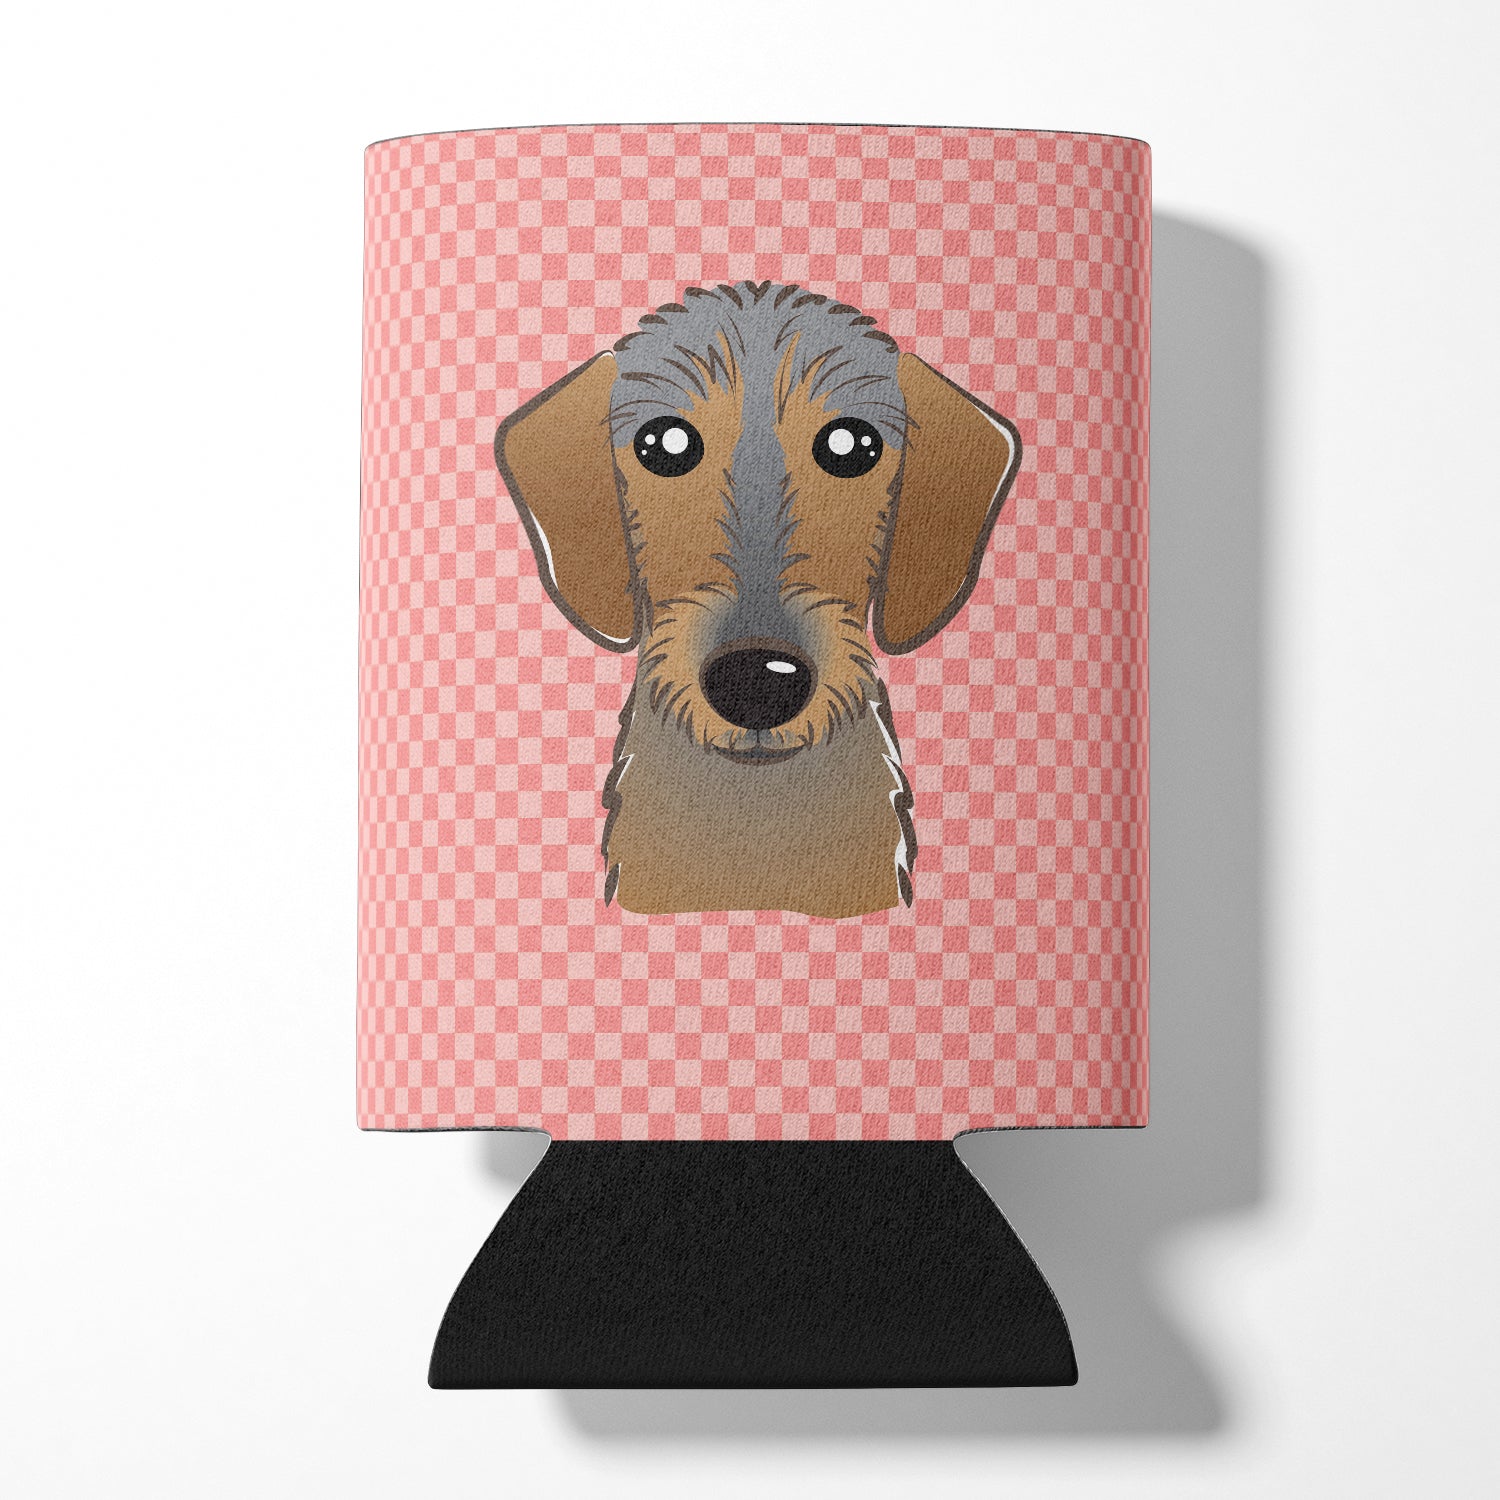 Checkerboard Pink Wirehaired Dachshund Can or Bottle Hugger BB1233CC